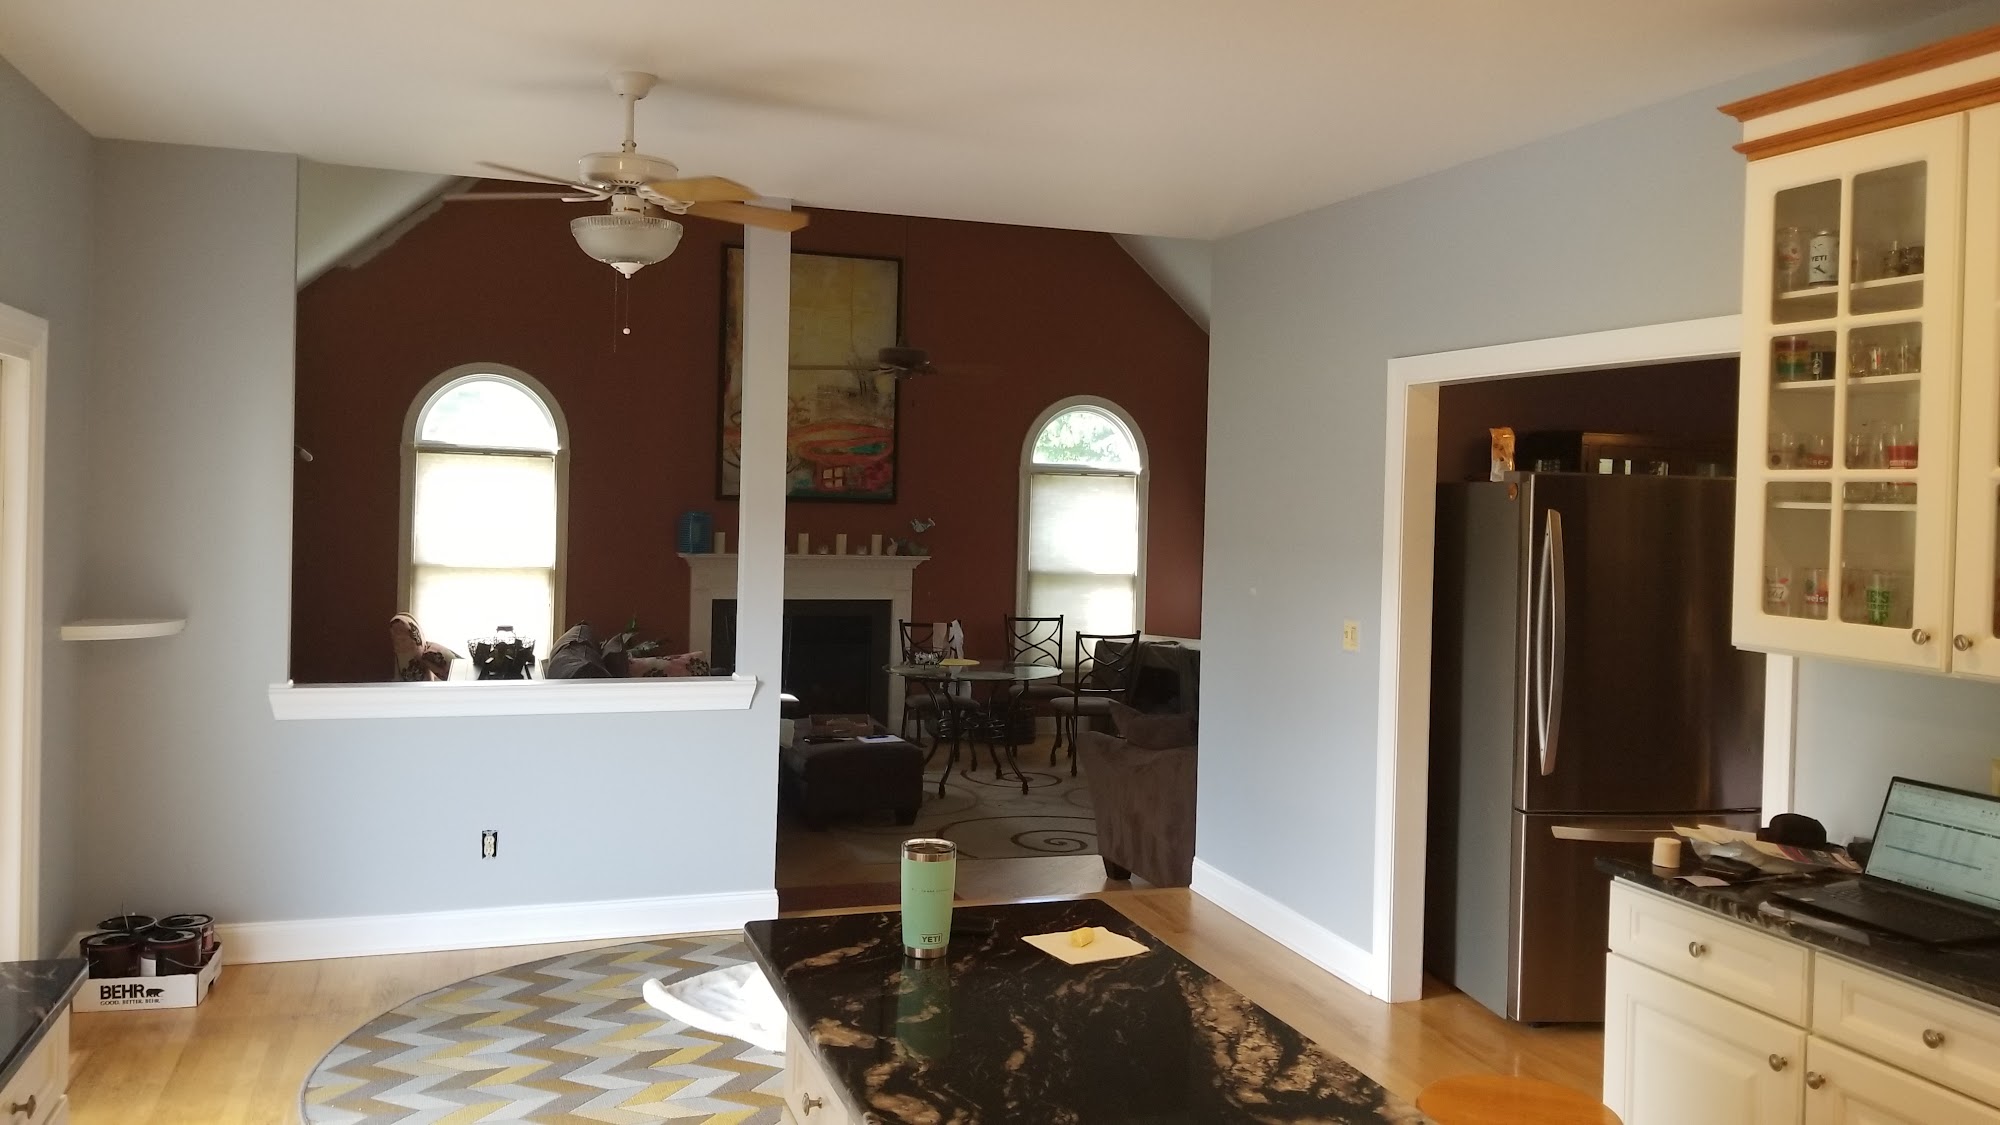 Pavo Interior Painting 5 Railroad Ln, Whitehouse Station New Jersey 08889